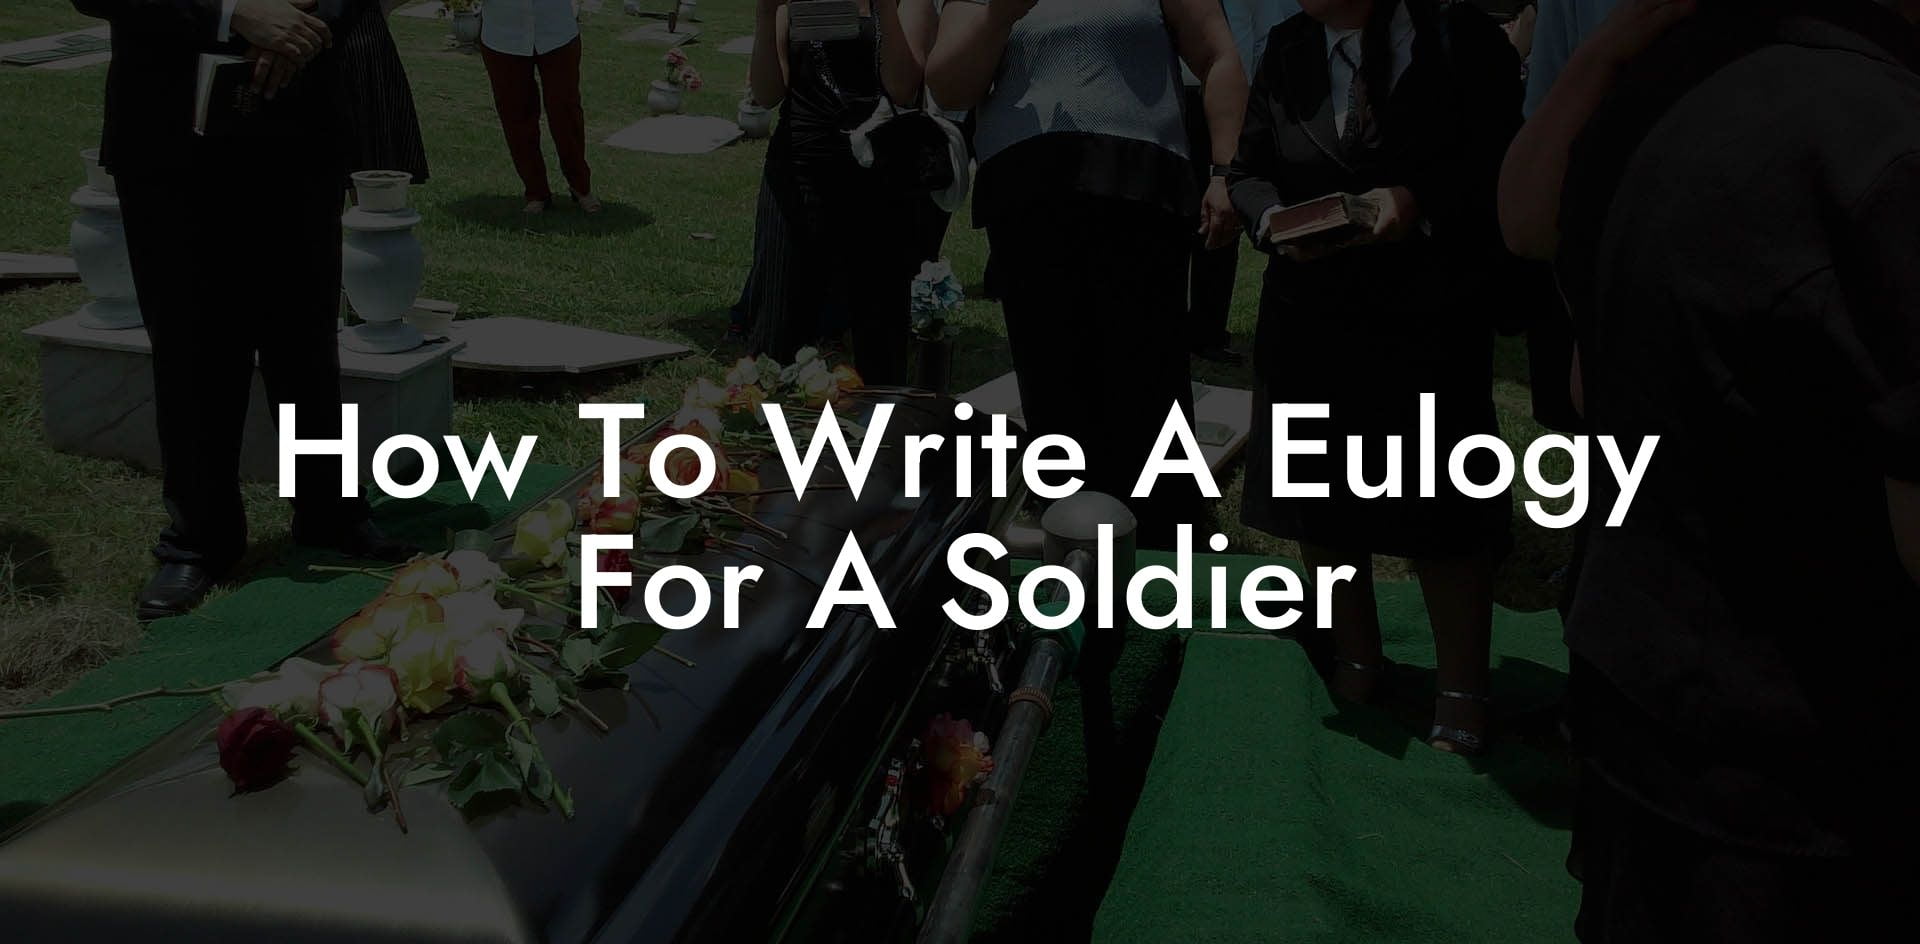 How To Write A Eulogy For A Soldier